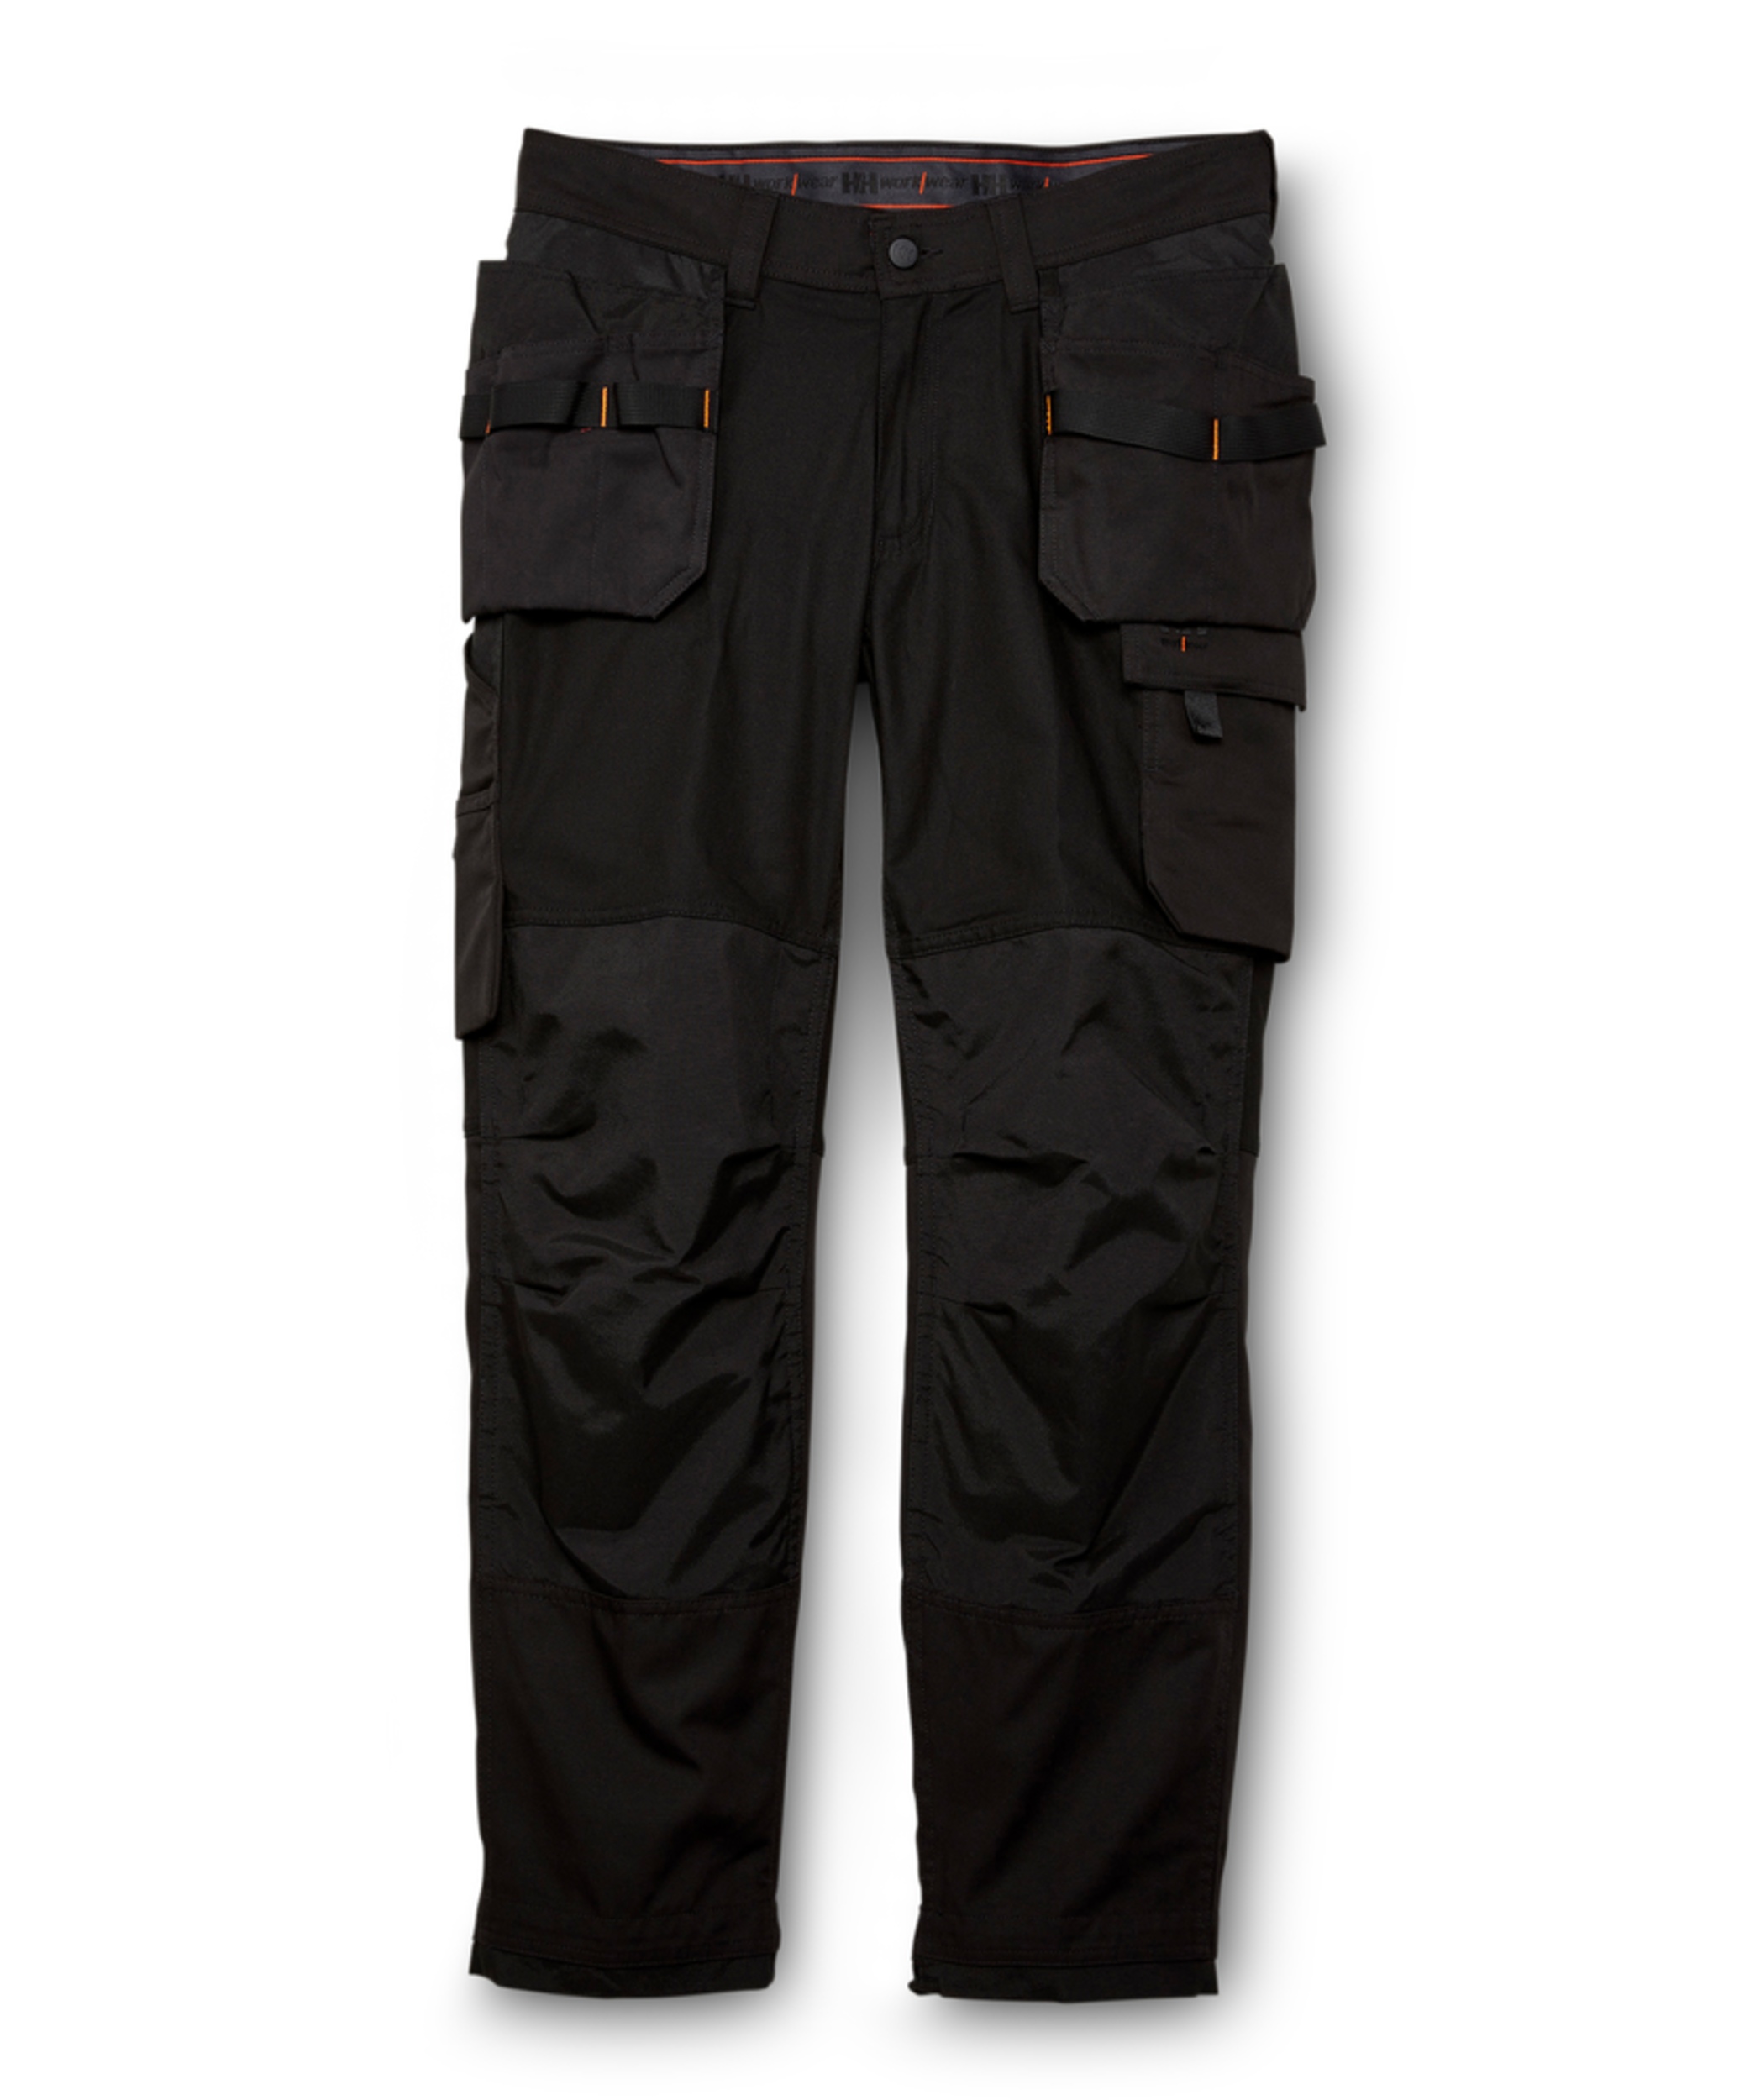 Helly Hansen Workwear Men's Oxford Lined Construction Work Pants | Marks